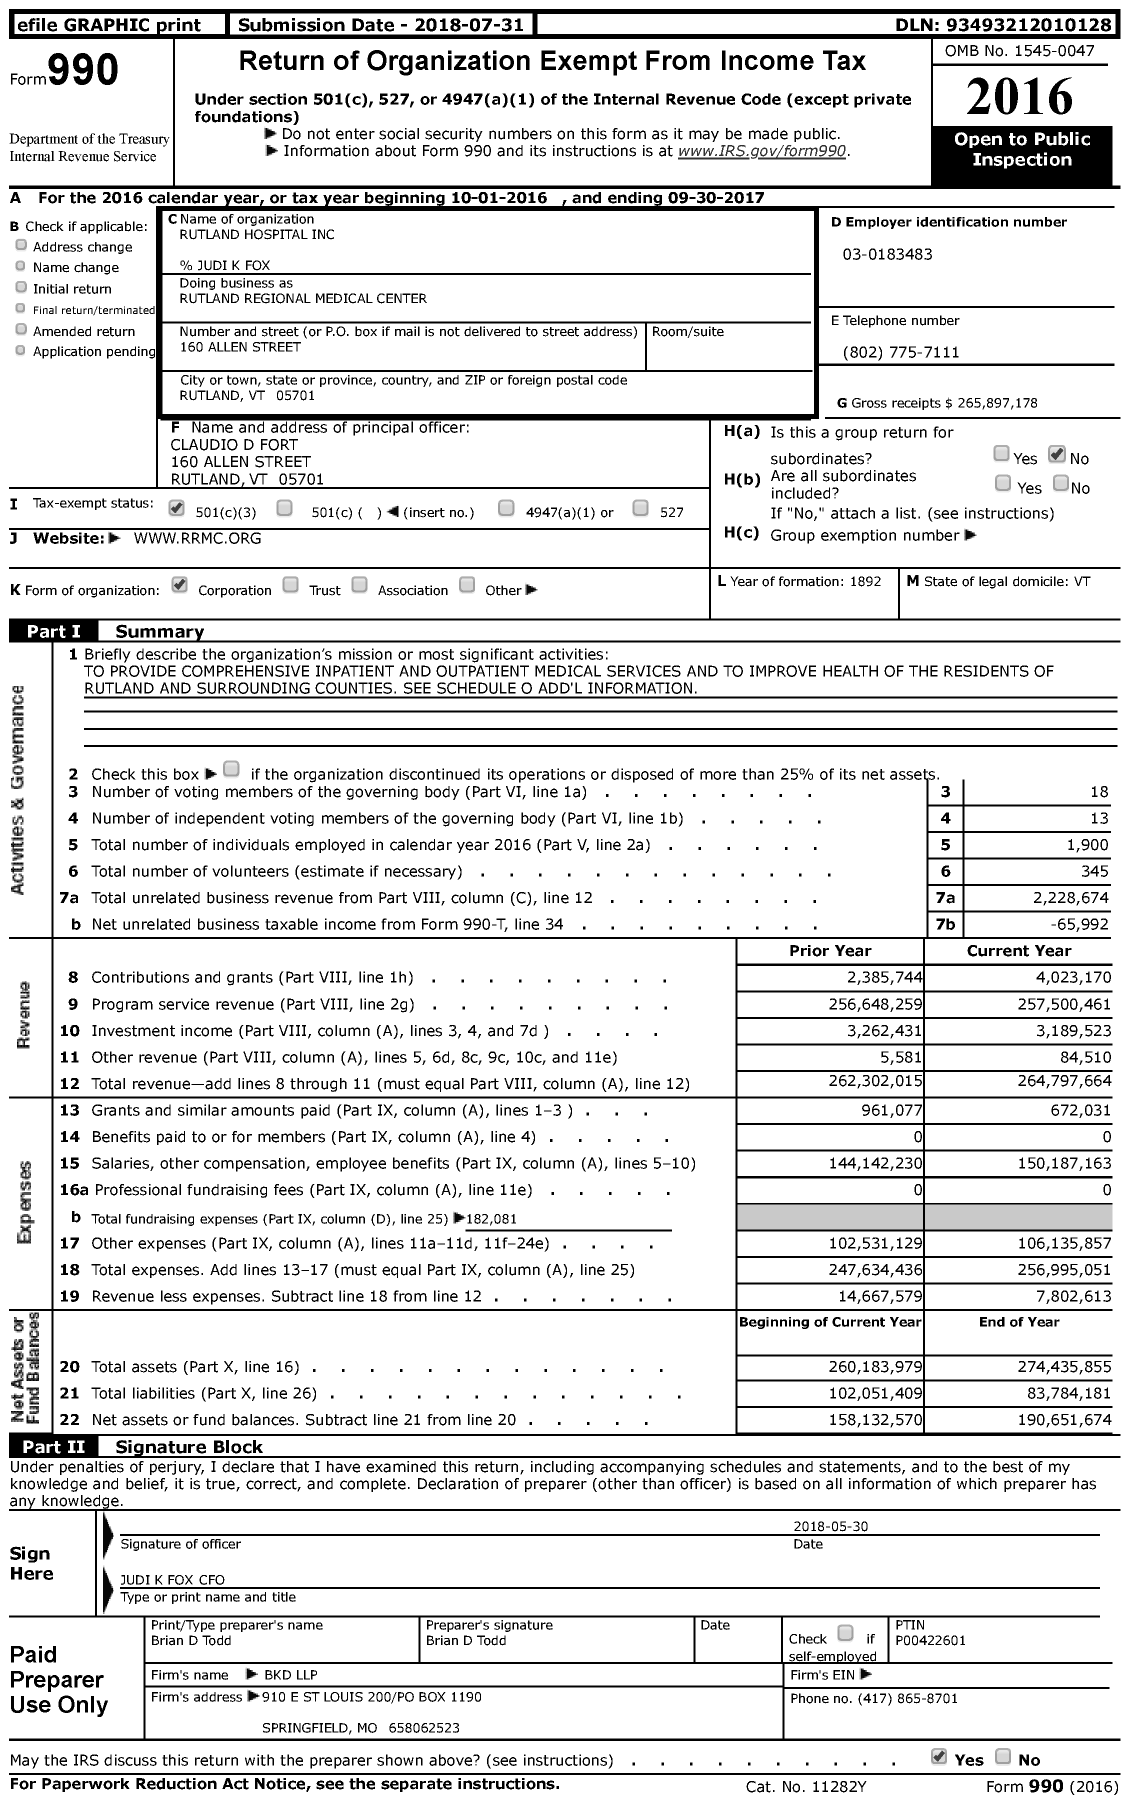 Image of first page of 2016 Form 990 for Rutland Regional Medical Center (RRMC)